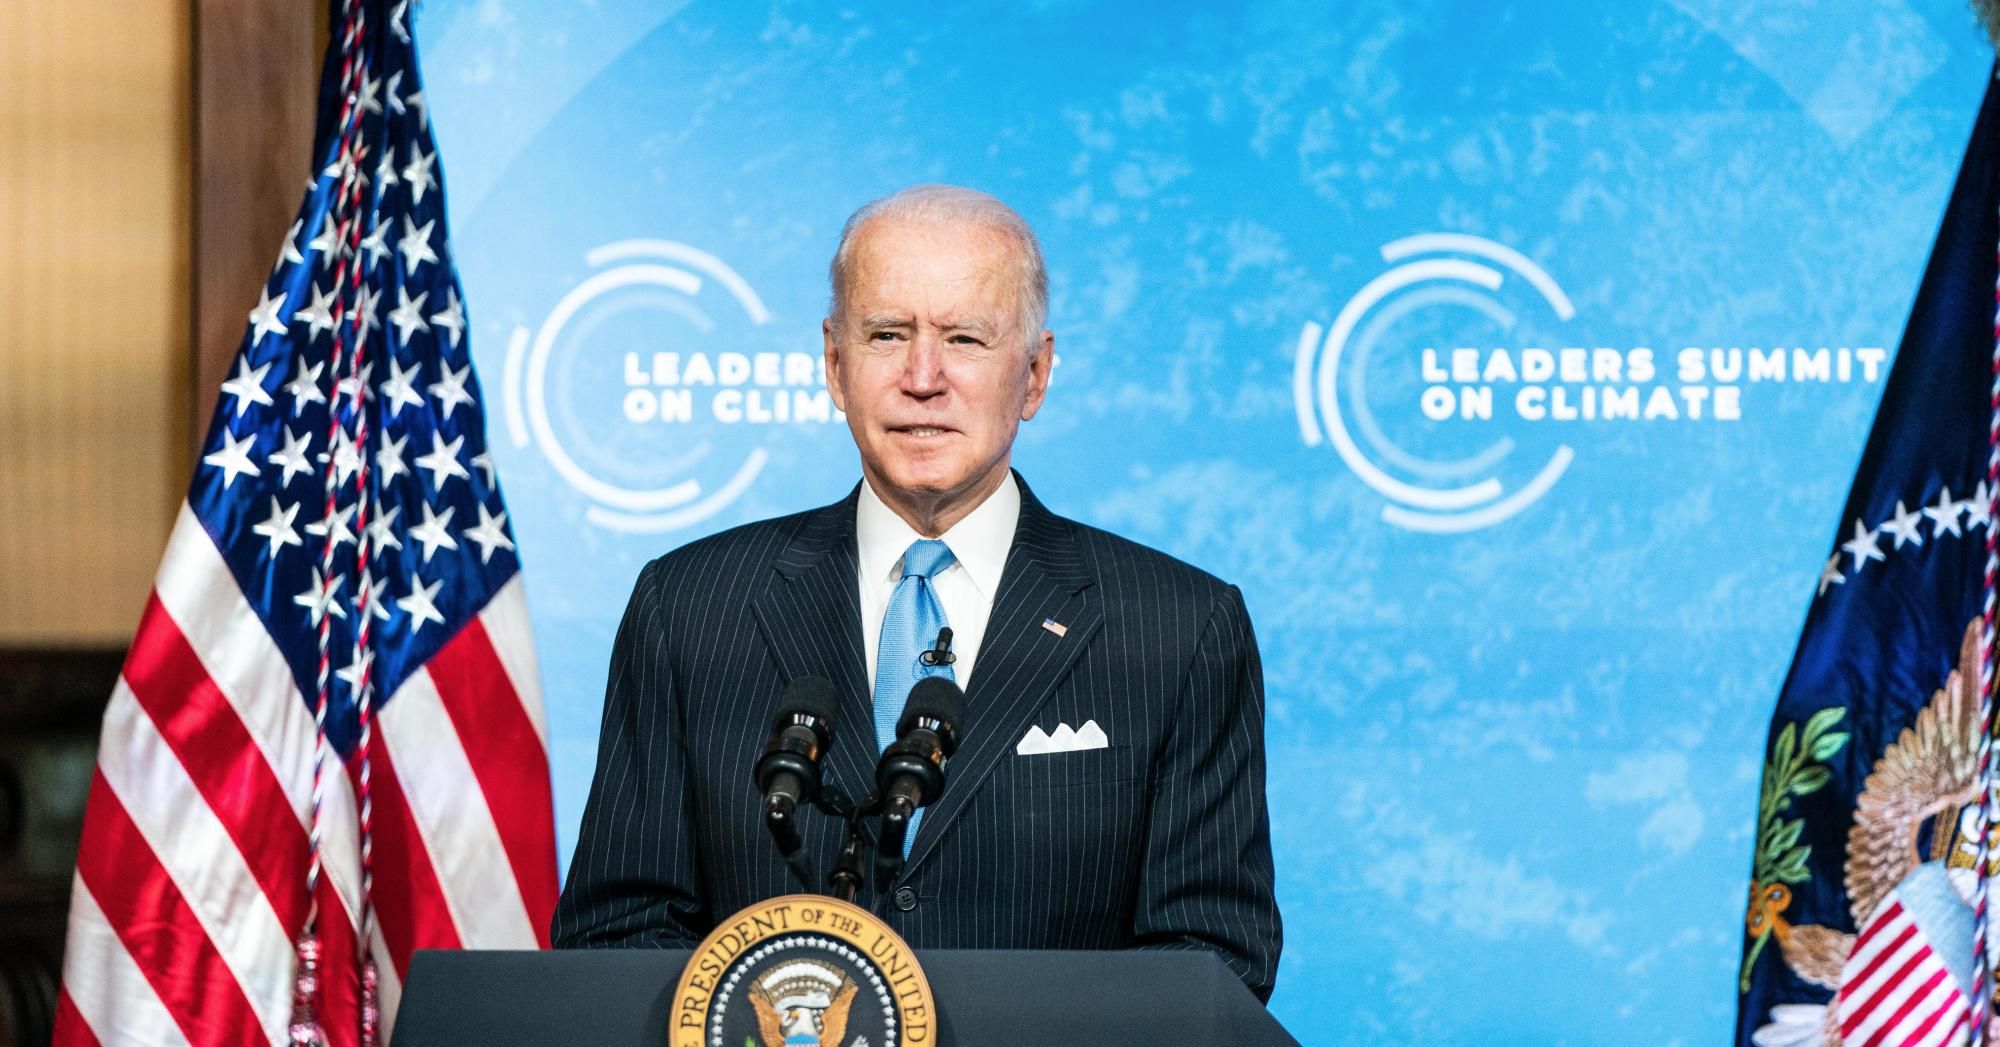 President Joe Biden delivers remarks during day two of the virtual Leaders Summit on Climate at the East Room of the White House April 23, 2021 in Washington, D.C. (Photo: Anna Moneymaker-Pool/Getty Images)